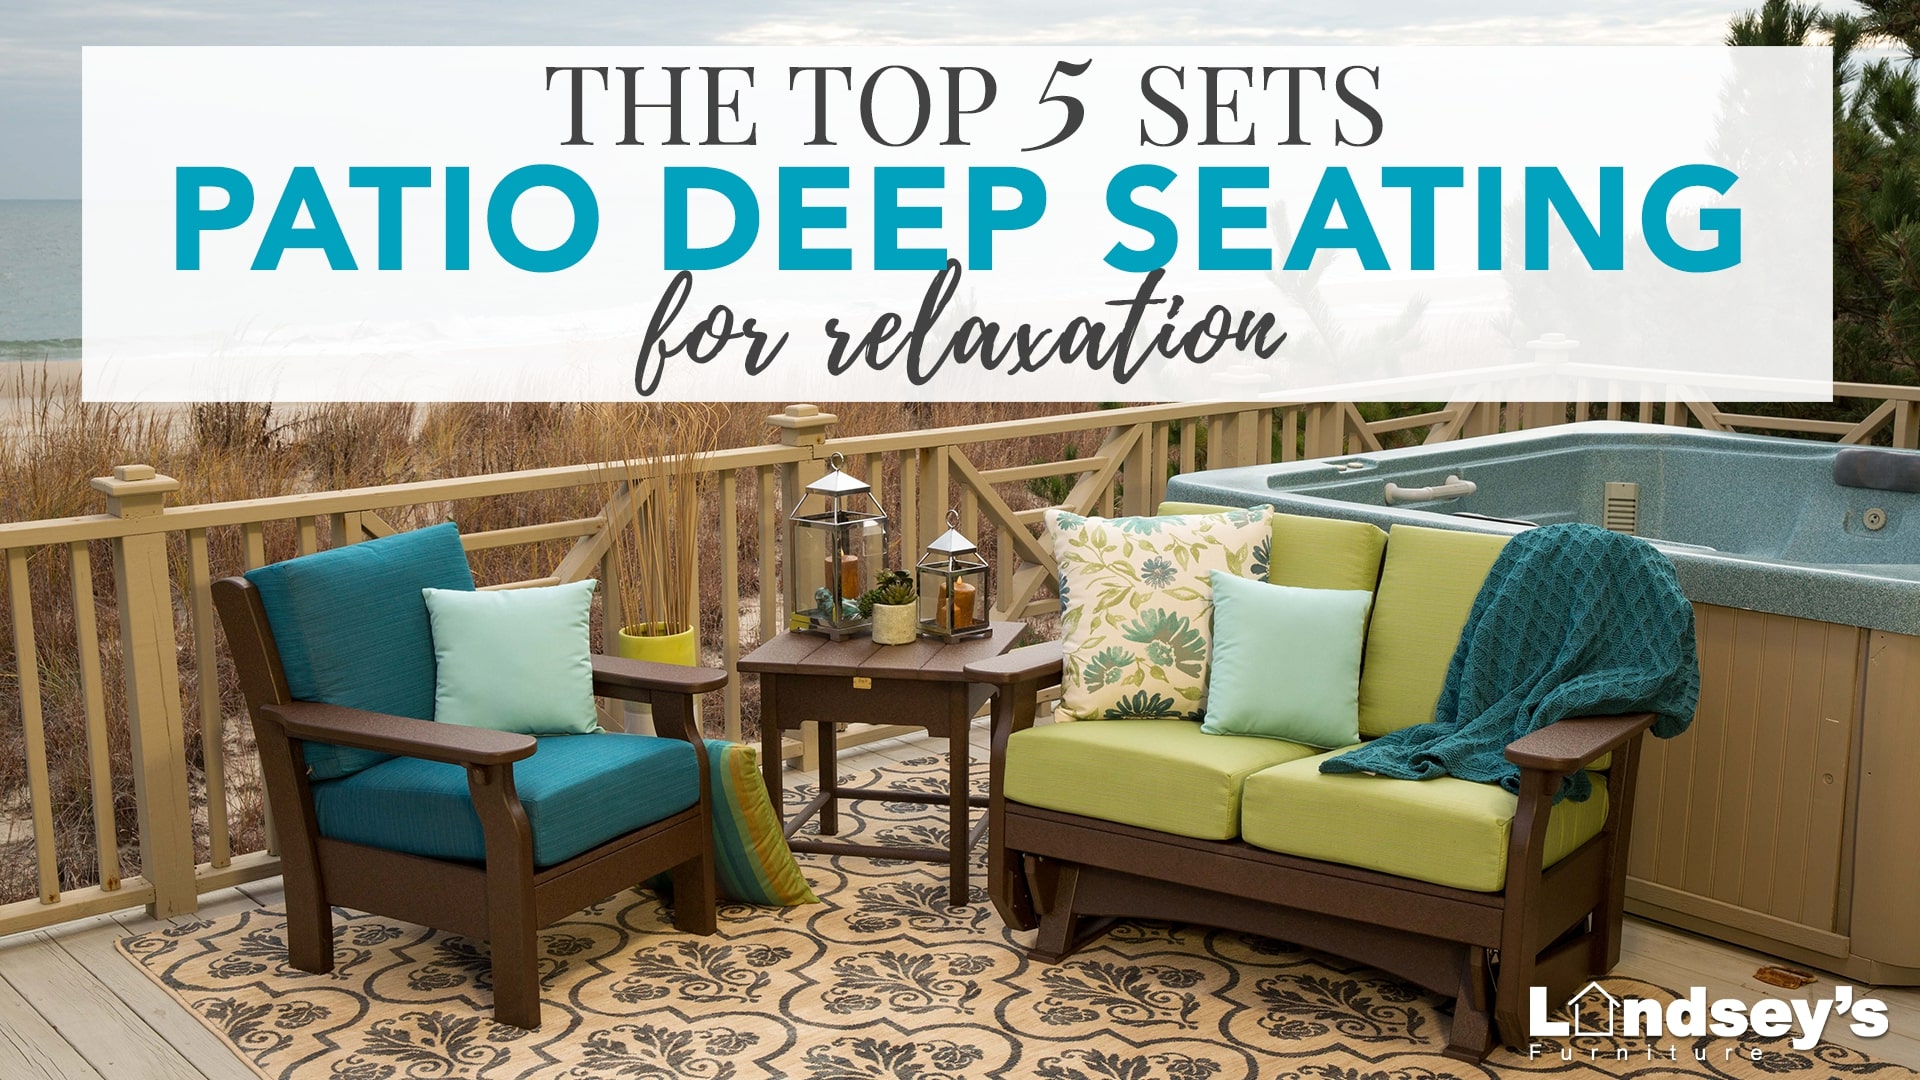 The Top 5 Patio Deep Seating Sets for Relaxation: A Comprehensive Guide